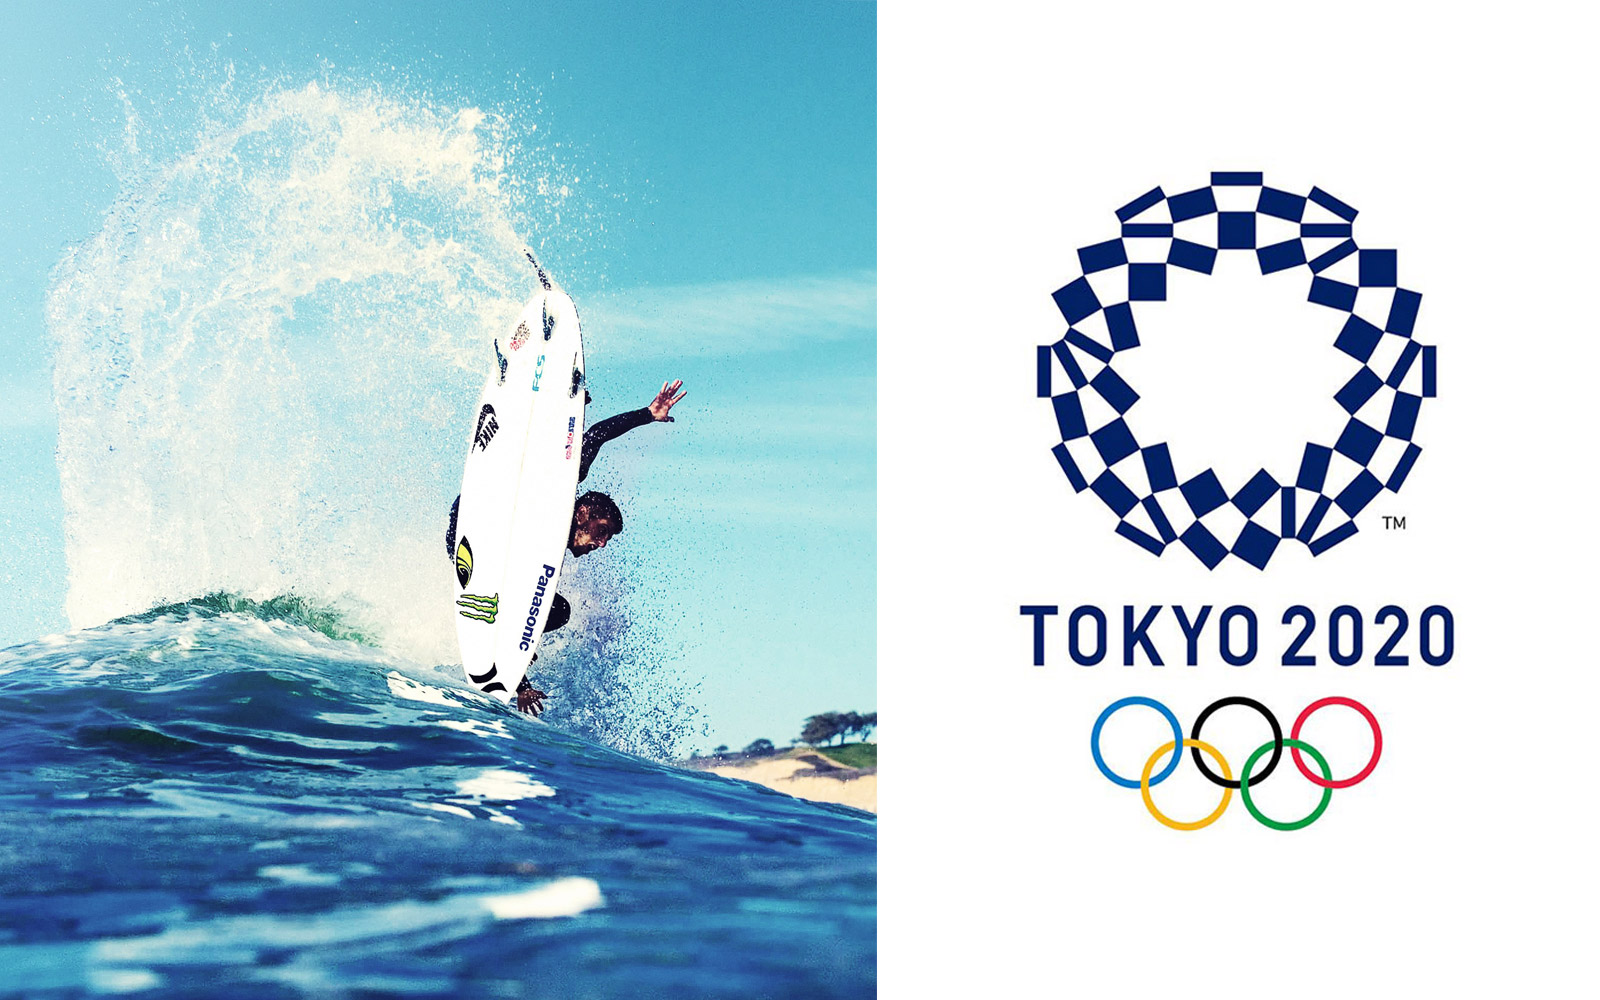 surfing-at-the-olympics-tokyo-2020